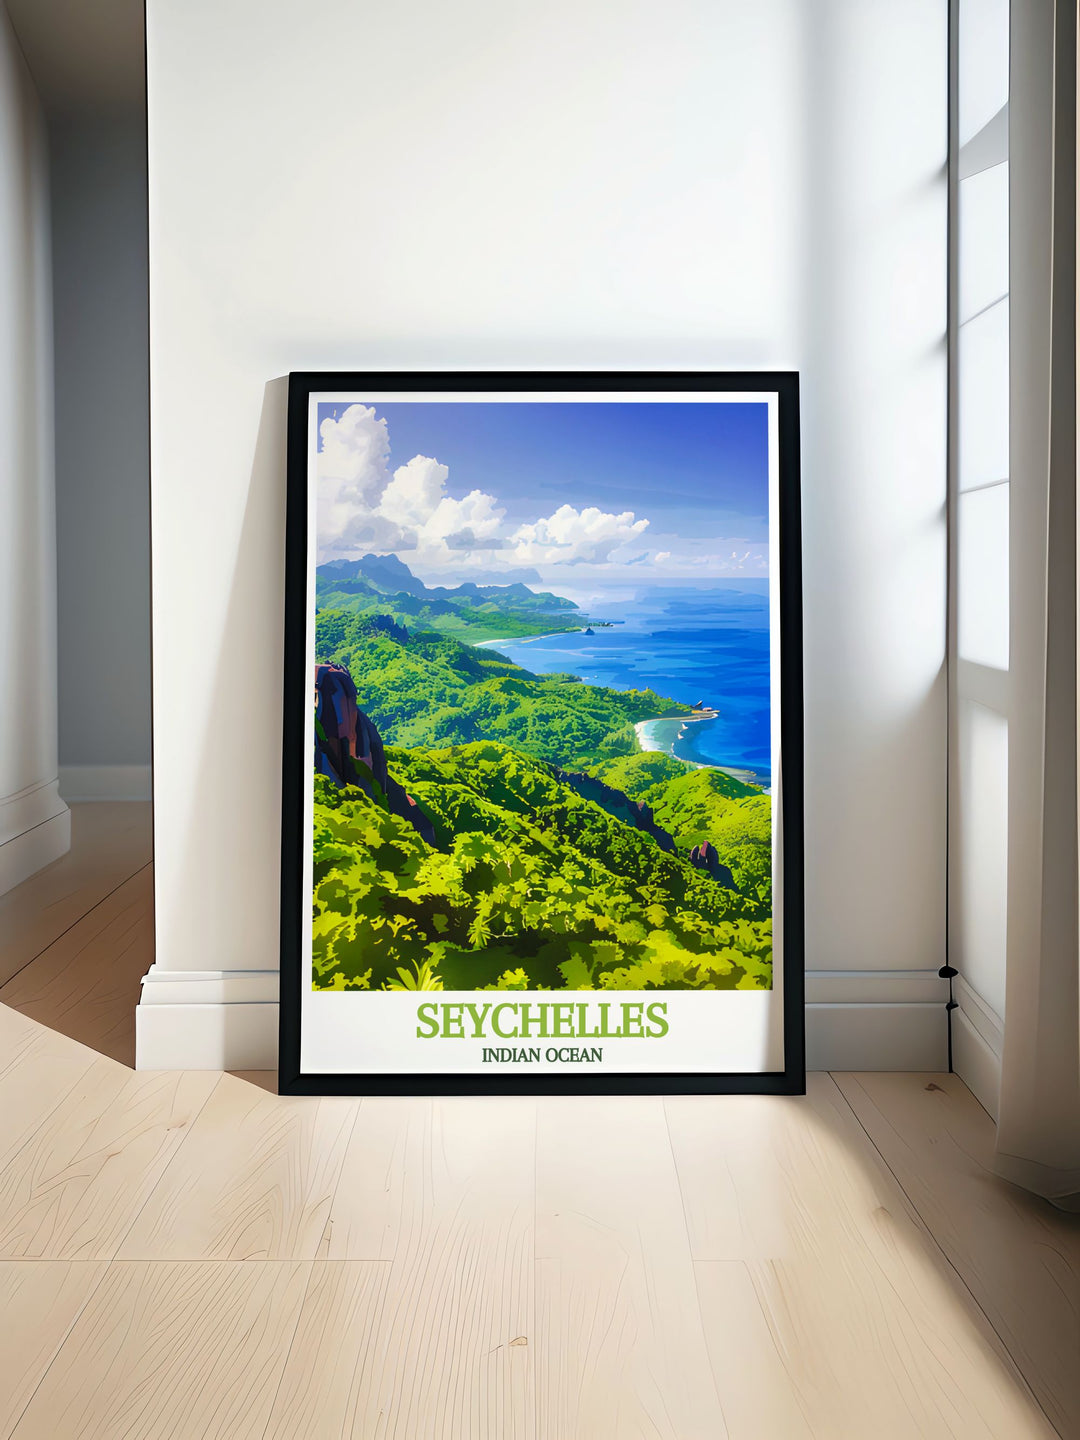 Featuring the serene waters of the Indian Ocean, this poster showcases the tranquil beauty of Seychelles, offering a glimpse into one of the worlds most unique natural wonders.